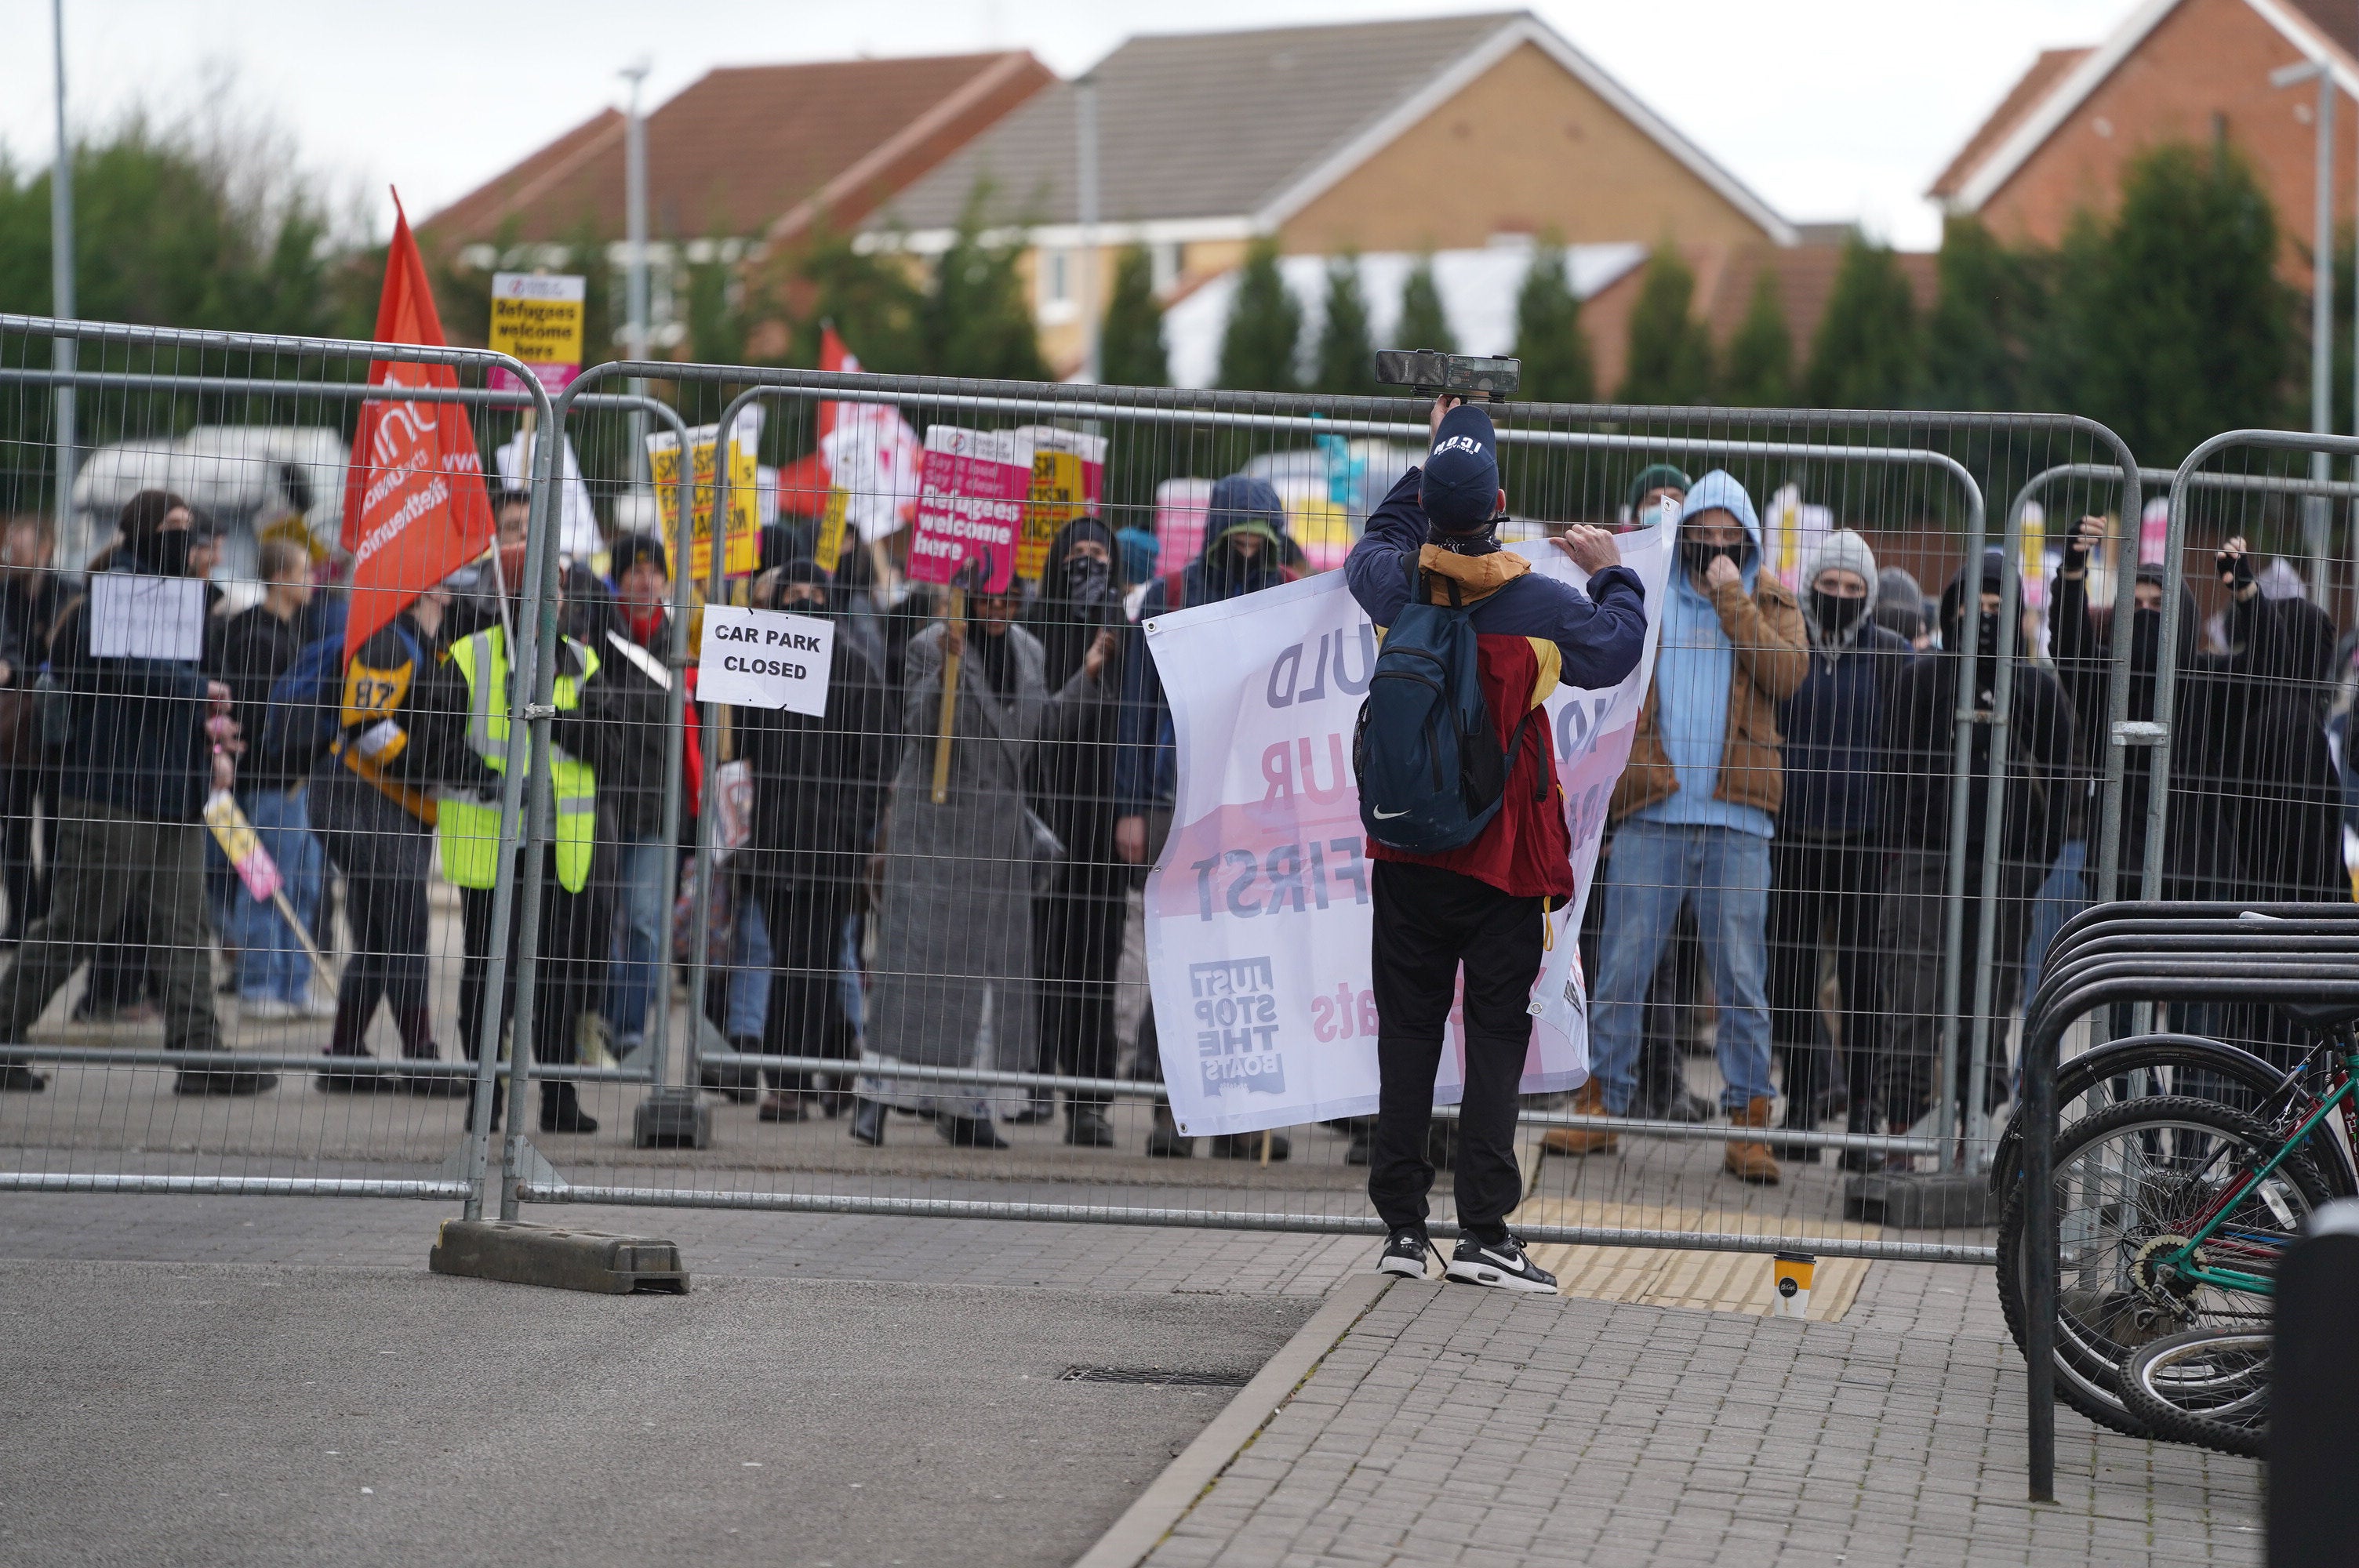 Protesters outside a Holiday Inn, Rotherham